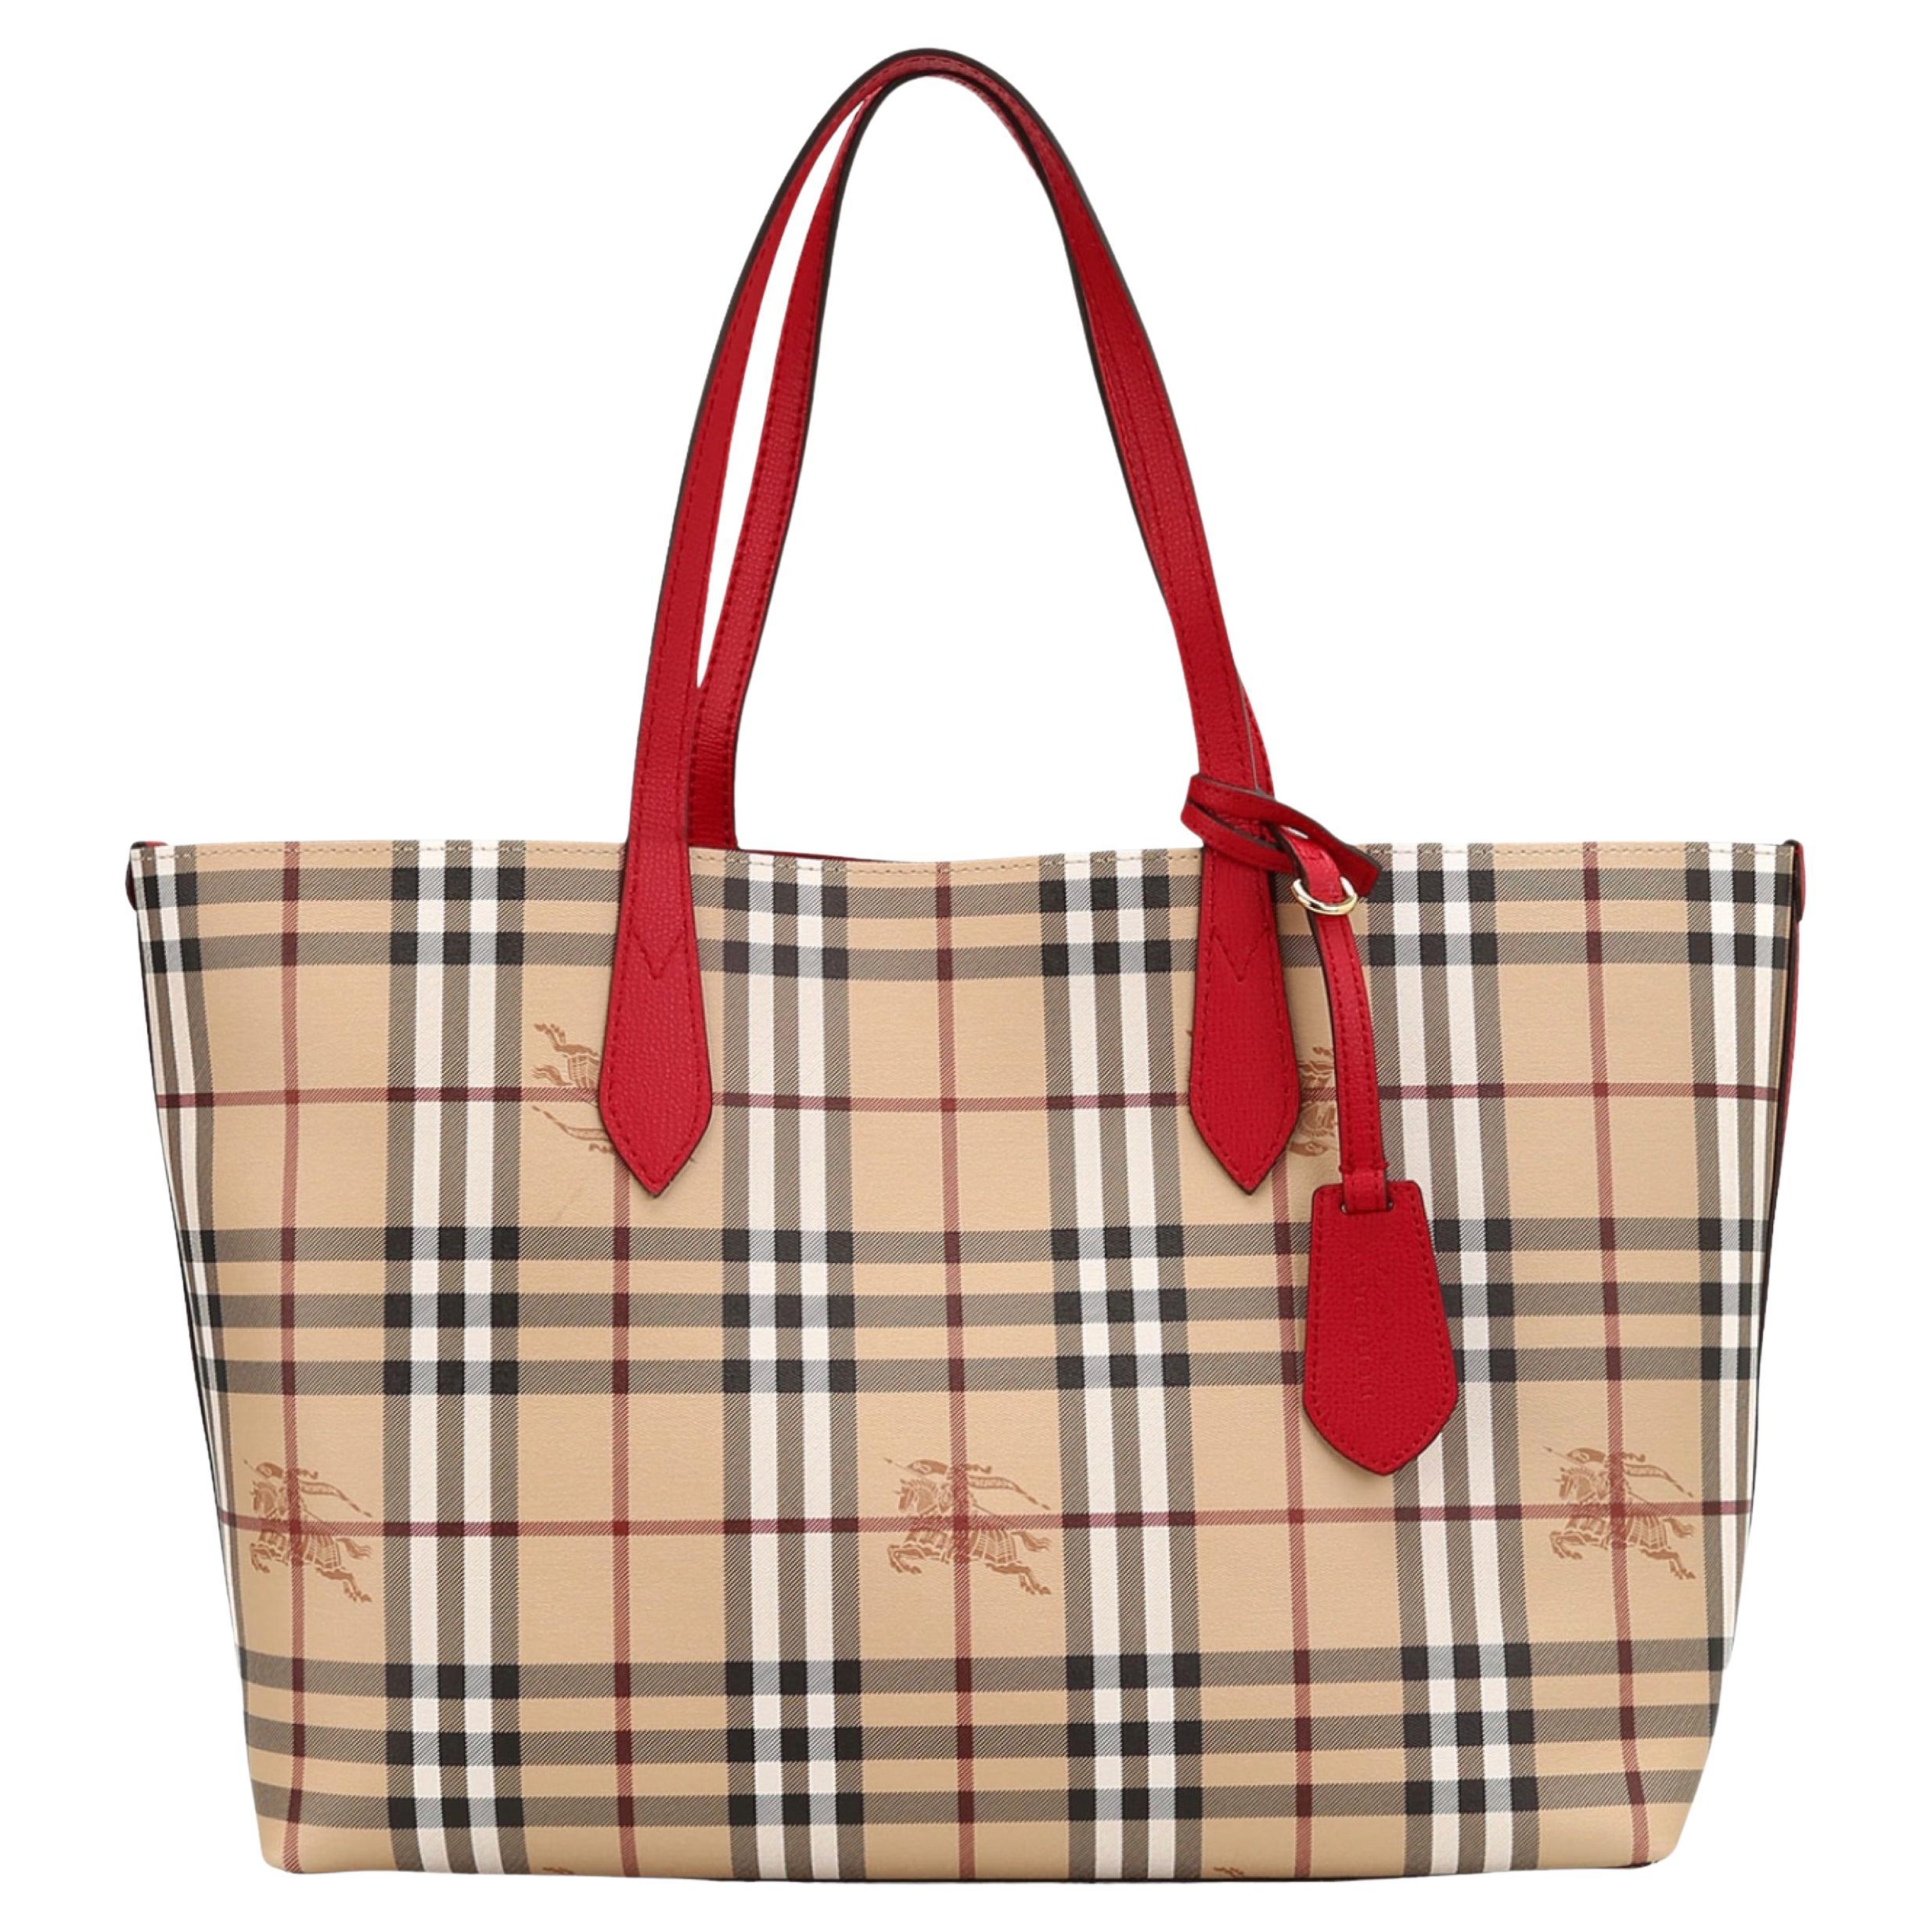 NEW Burberry Red Haymarket Check Reversible Leather Tote Shoulder Bag For Sale